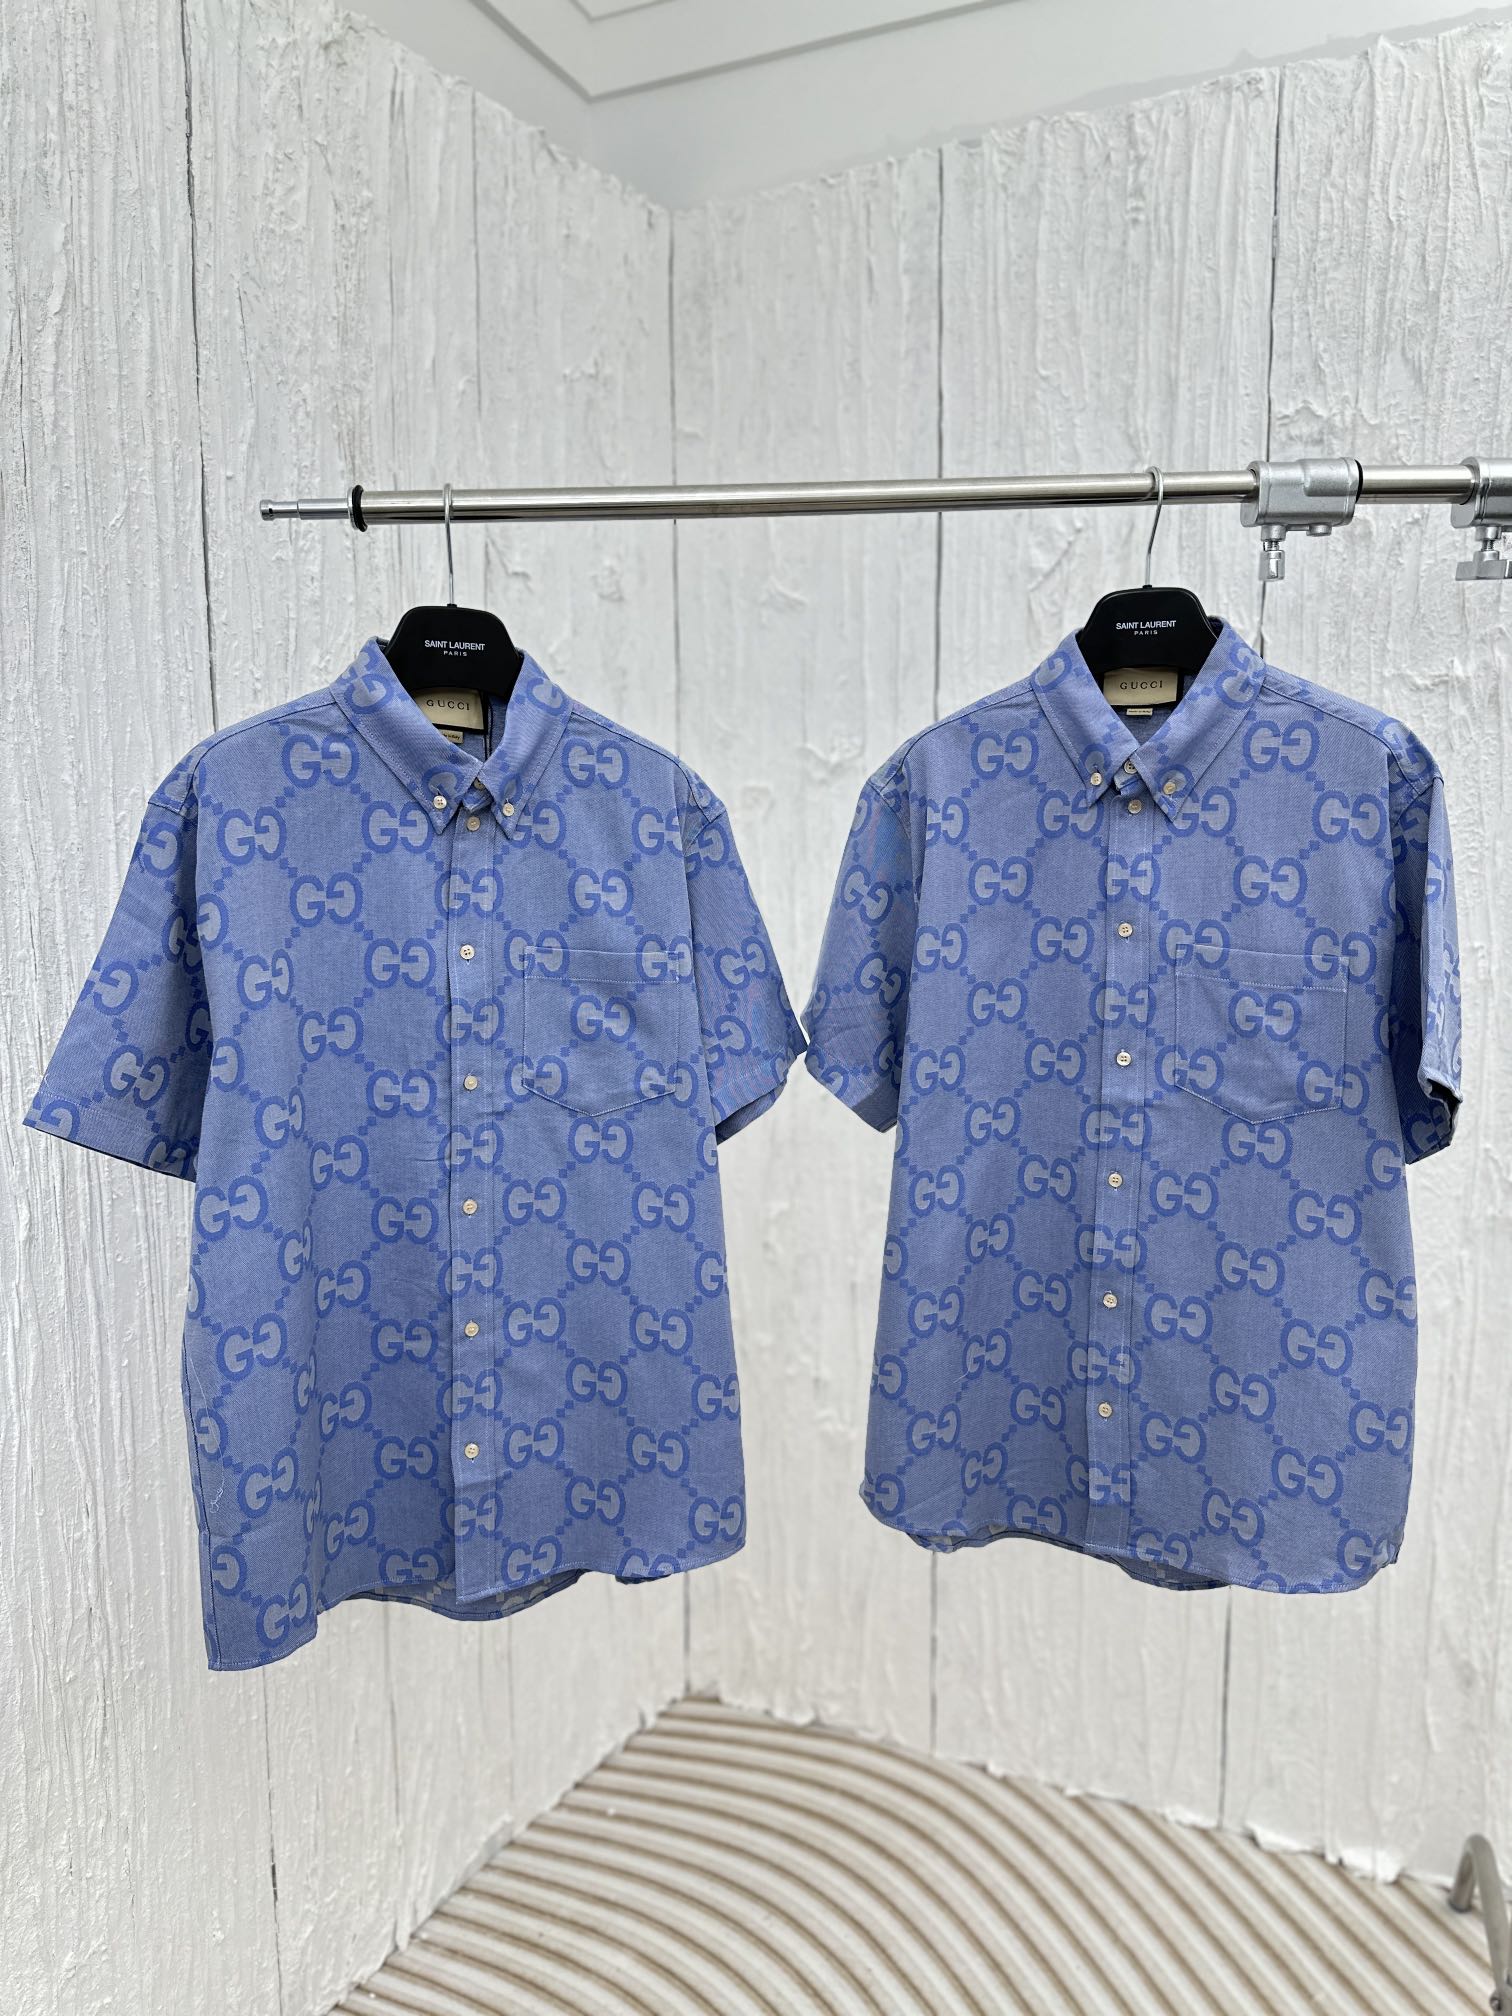 Gucci Wholesale
 Clothing Shirts & Blouses Designer High Replica
 Blue Grid Unisex Cotton Spring/Summer Collection